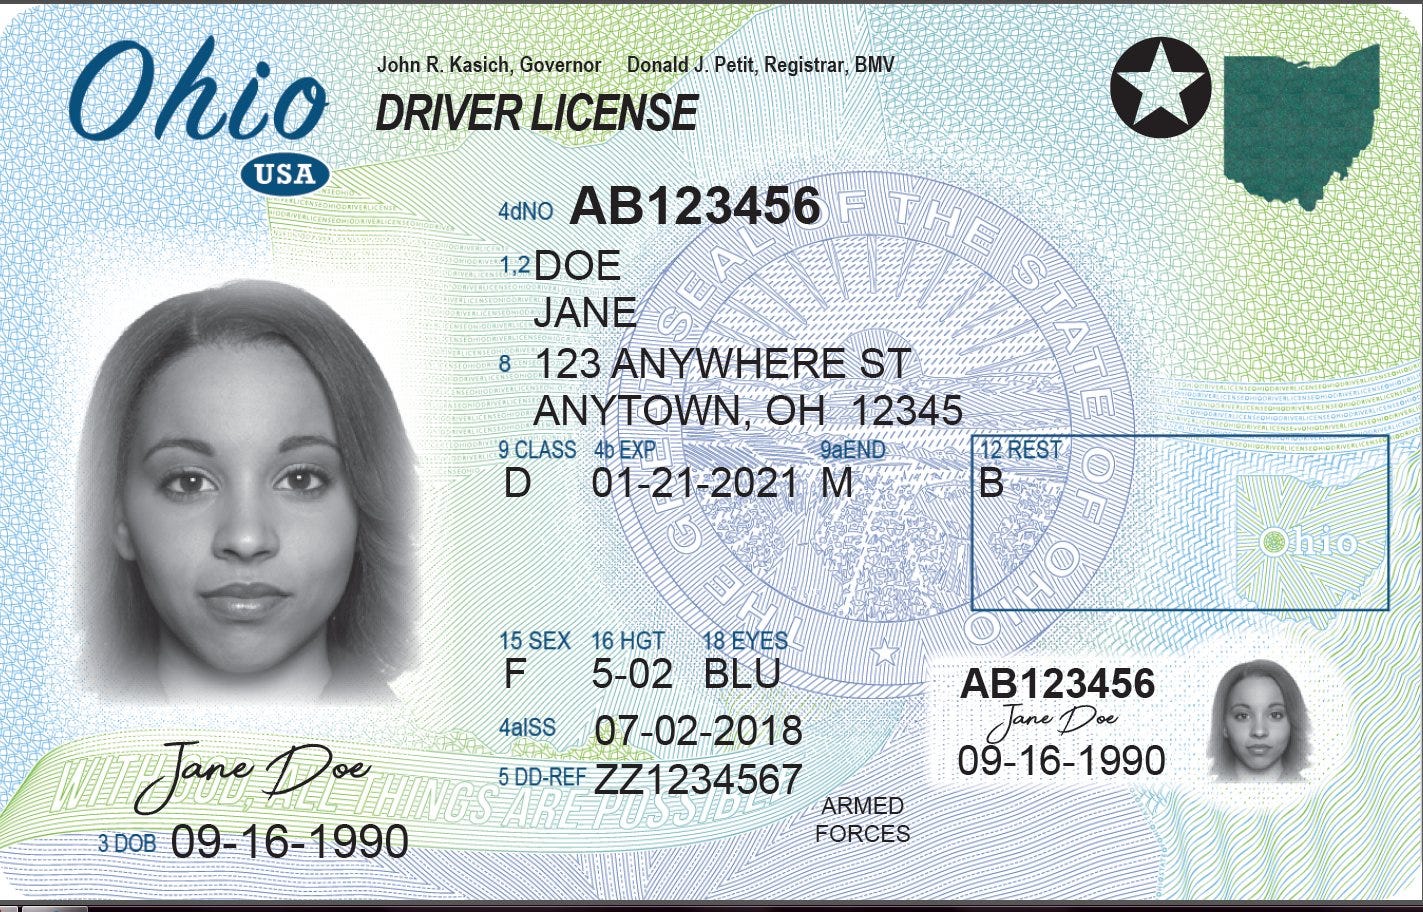 Ohio Drivers License Number Lookup - fonew